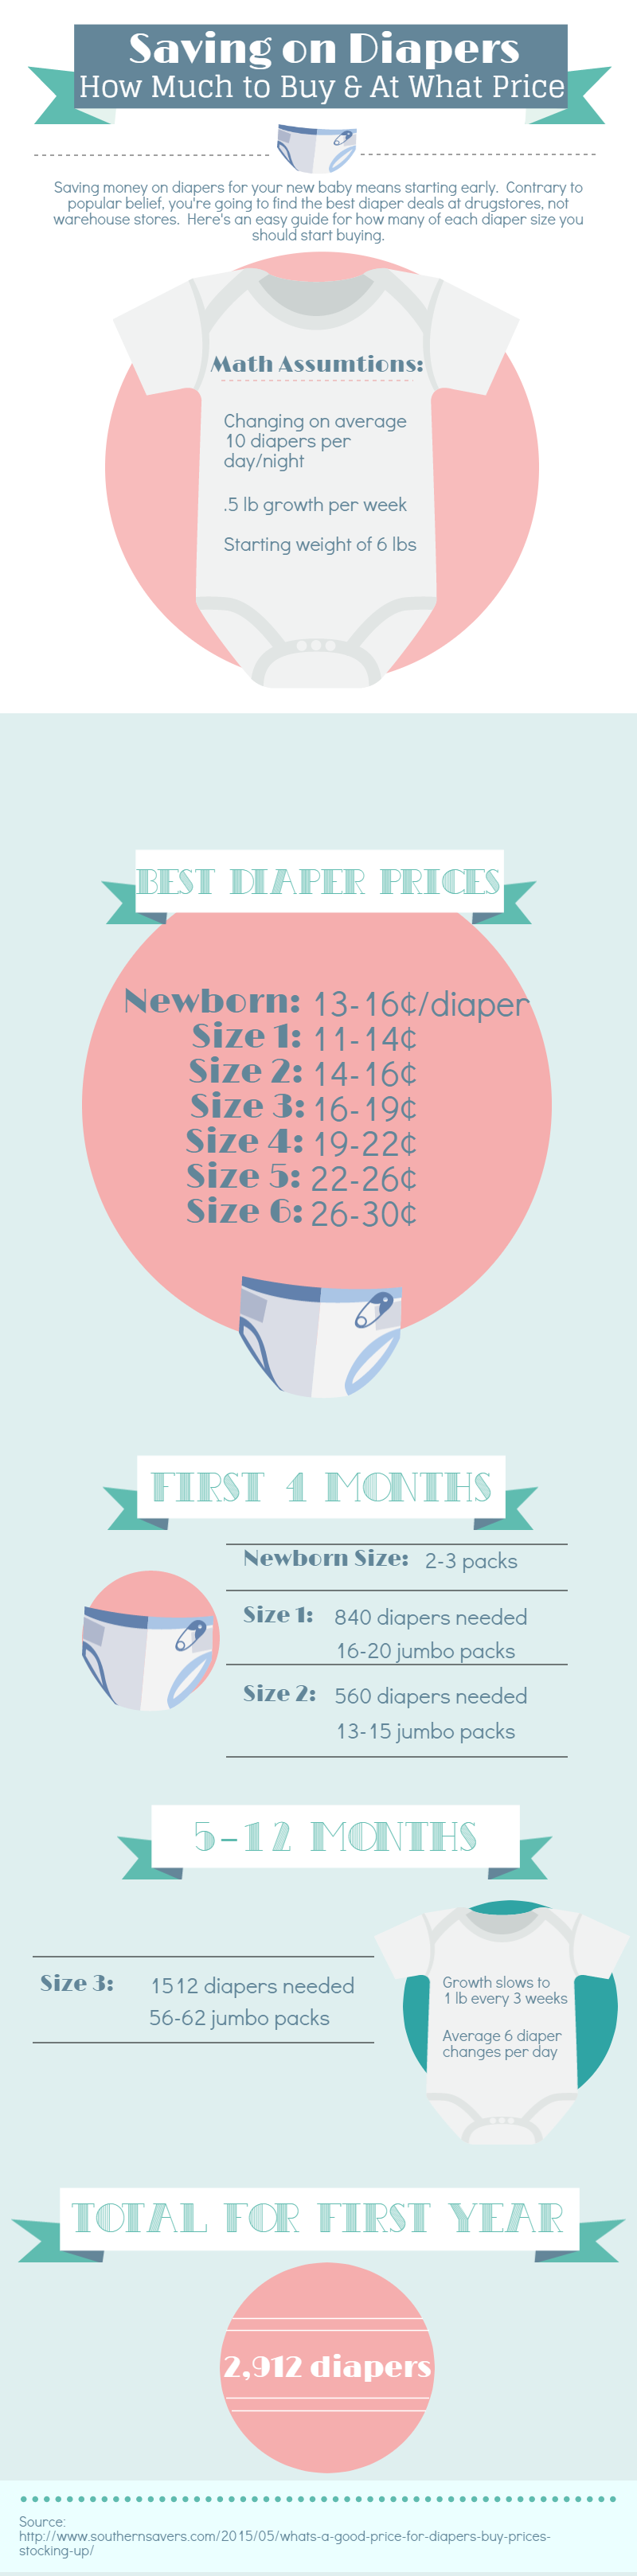 Diapers are insanely expensive at their regular prices, so figuring out how to save is required for survival. Here's an easy infographic to help you save on diapers.